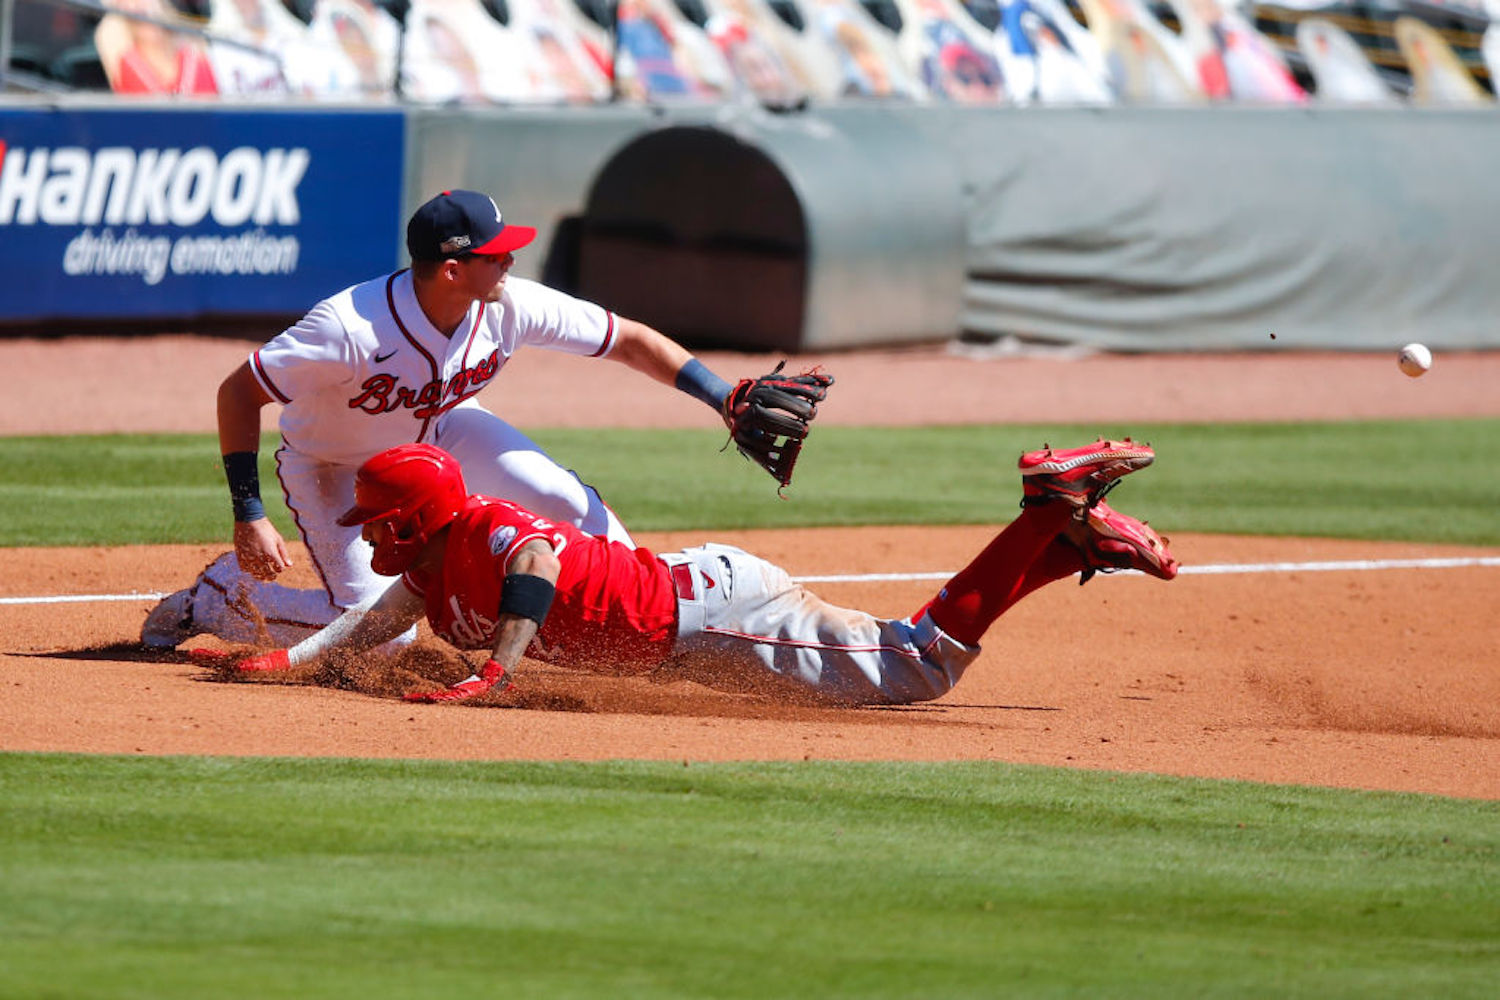 The Braves and Reds Just Set an MLB Playoff Record In the Most Boring Way Possible